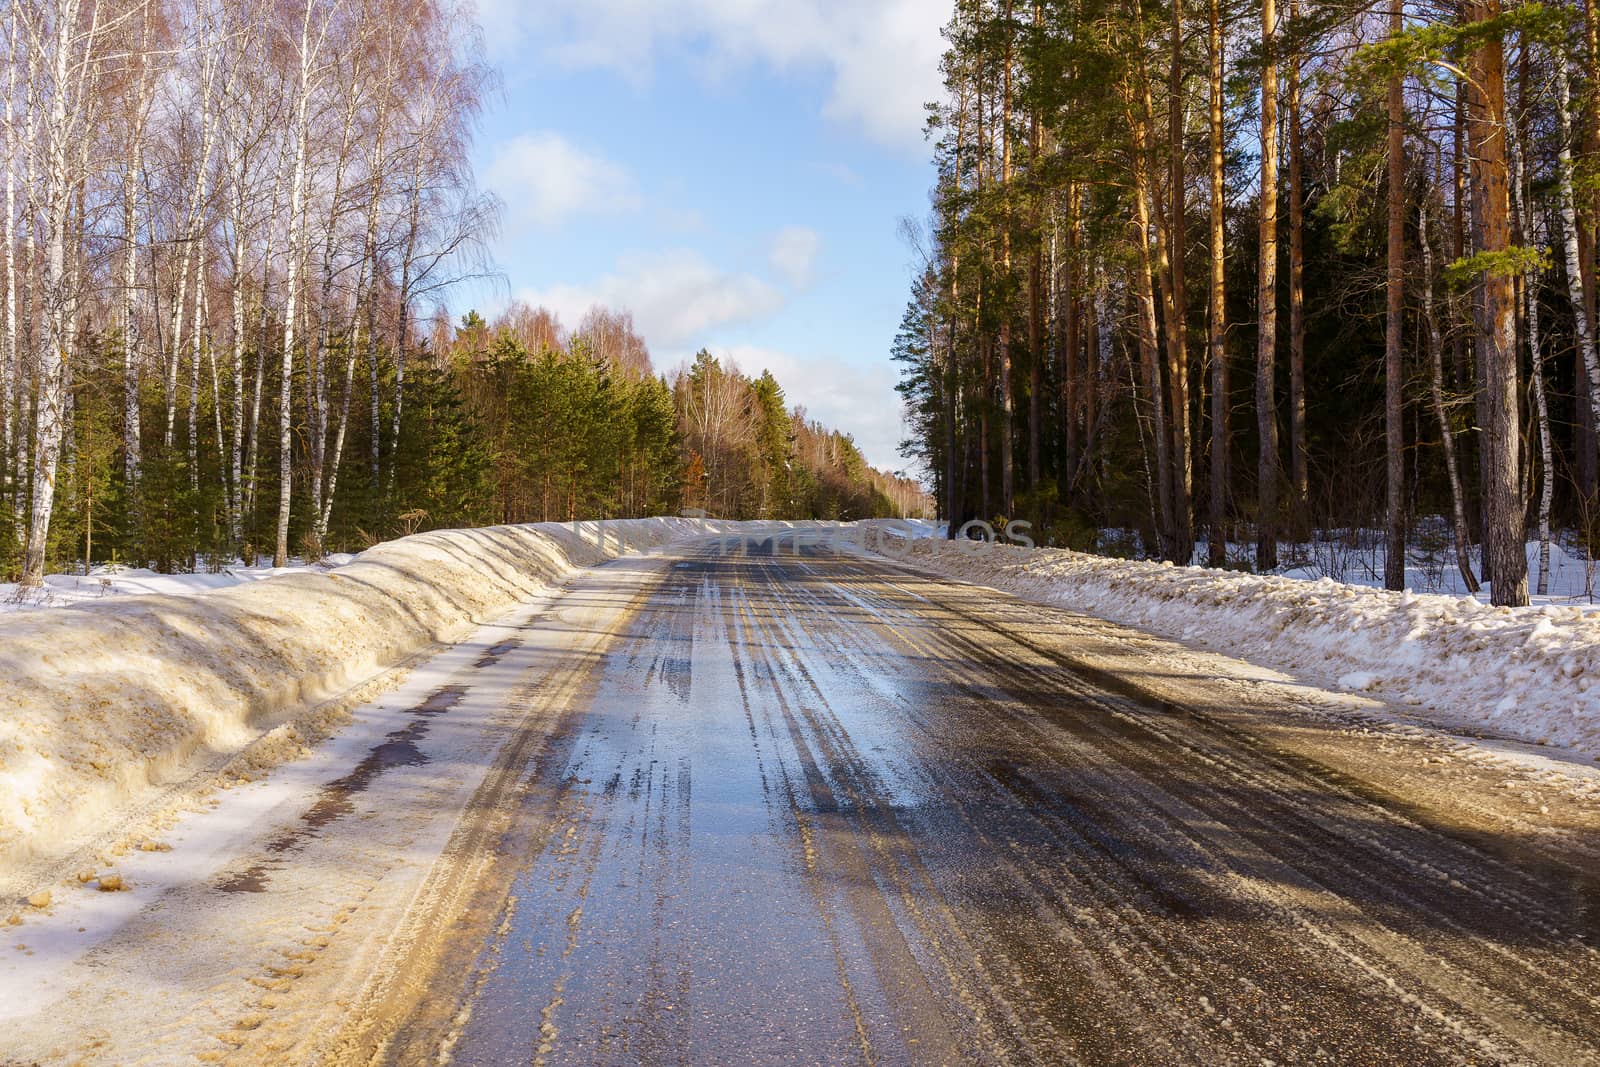 The road with melted snow through the winter forest to the thaw